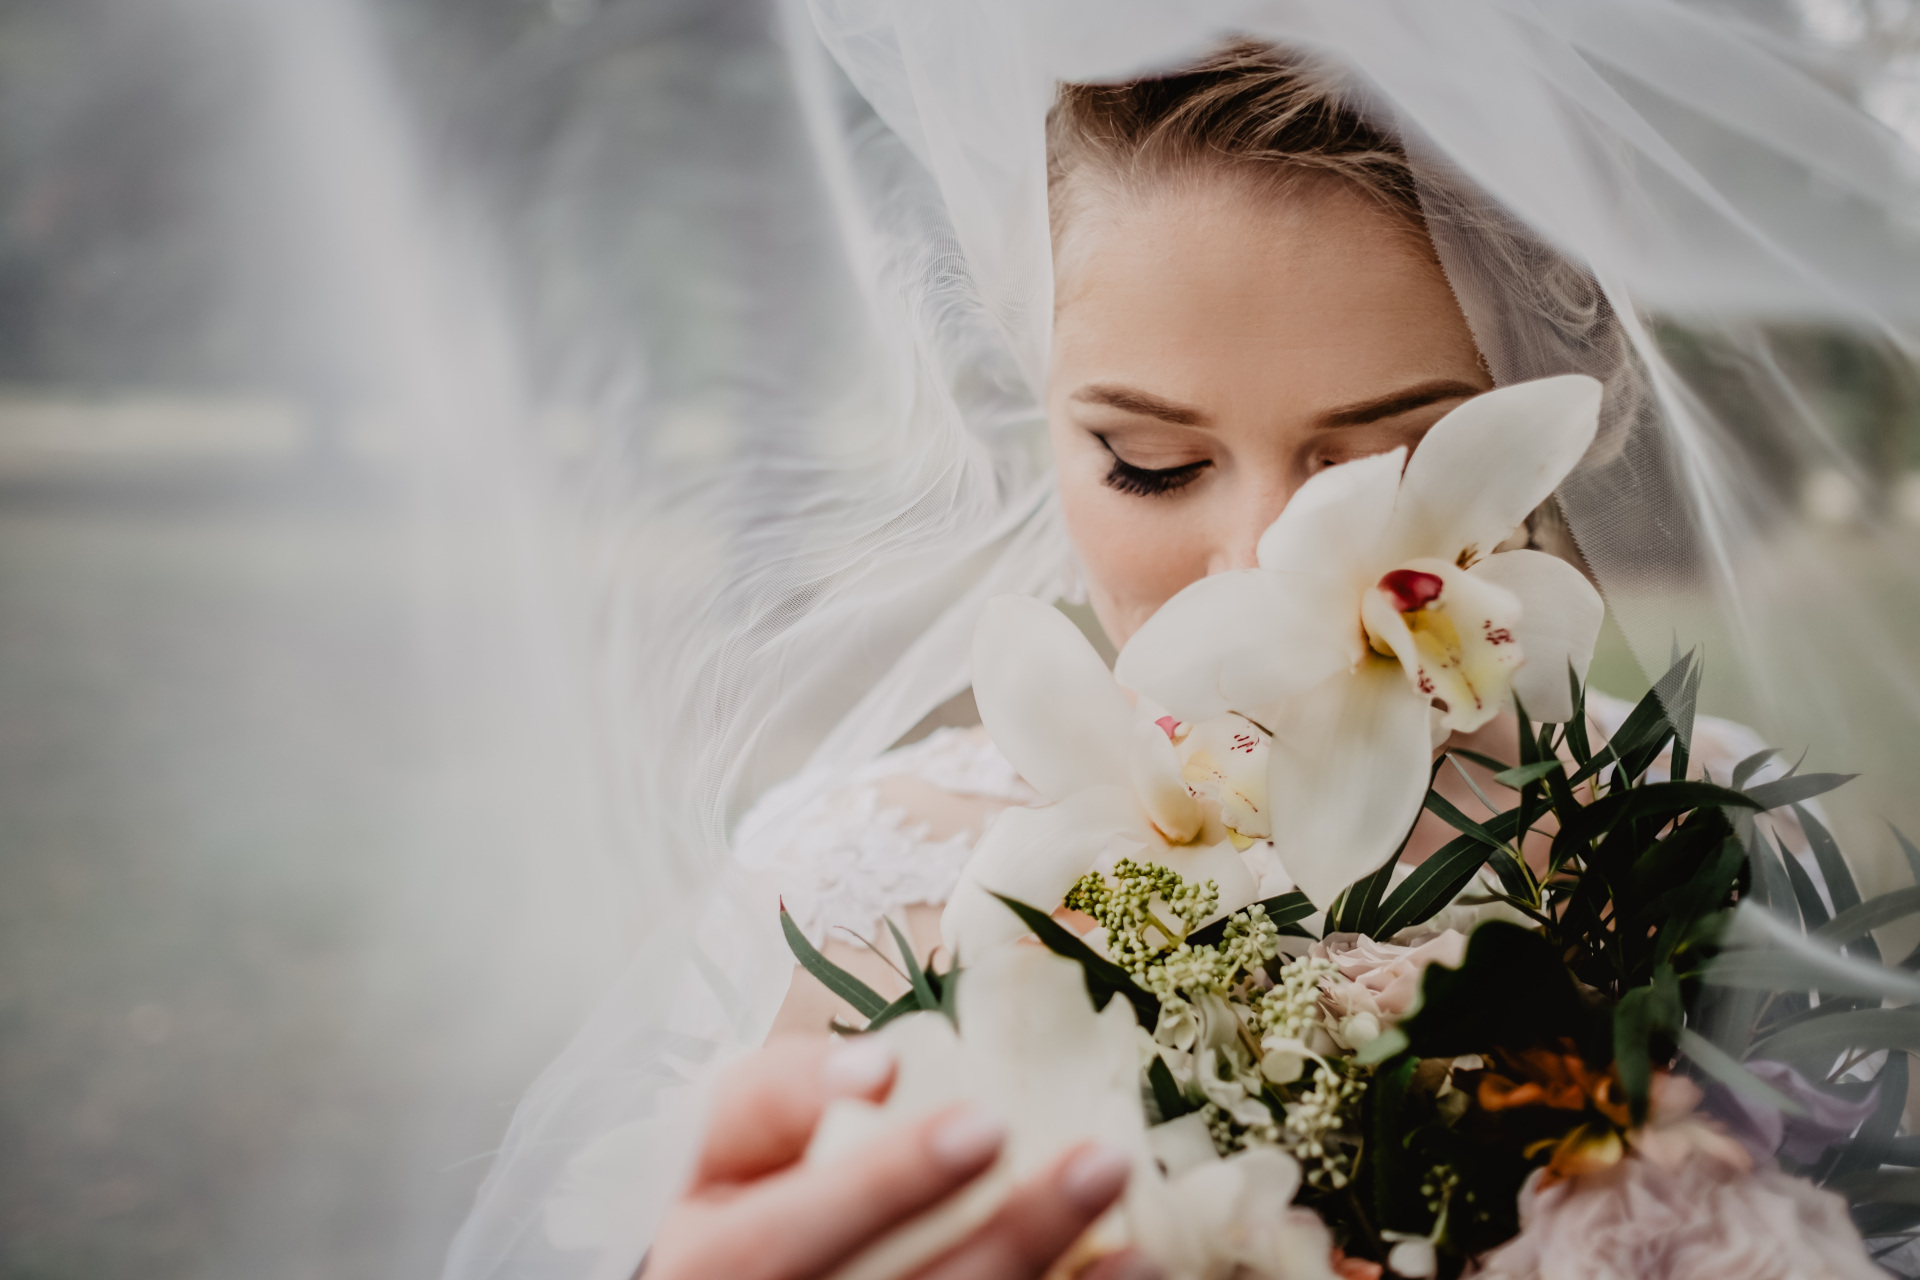 Bride with face and skin half covered by bouquet